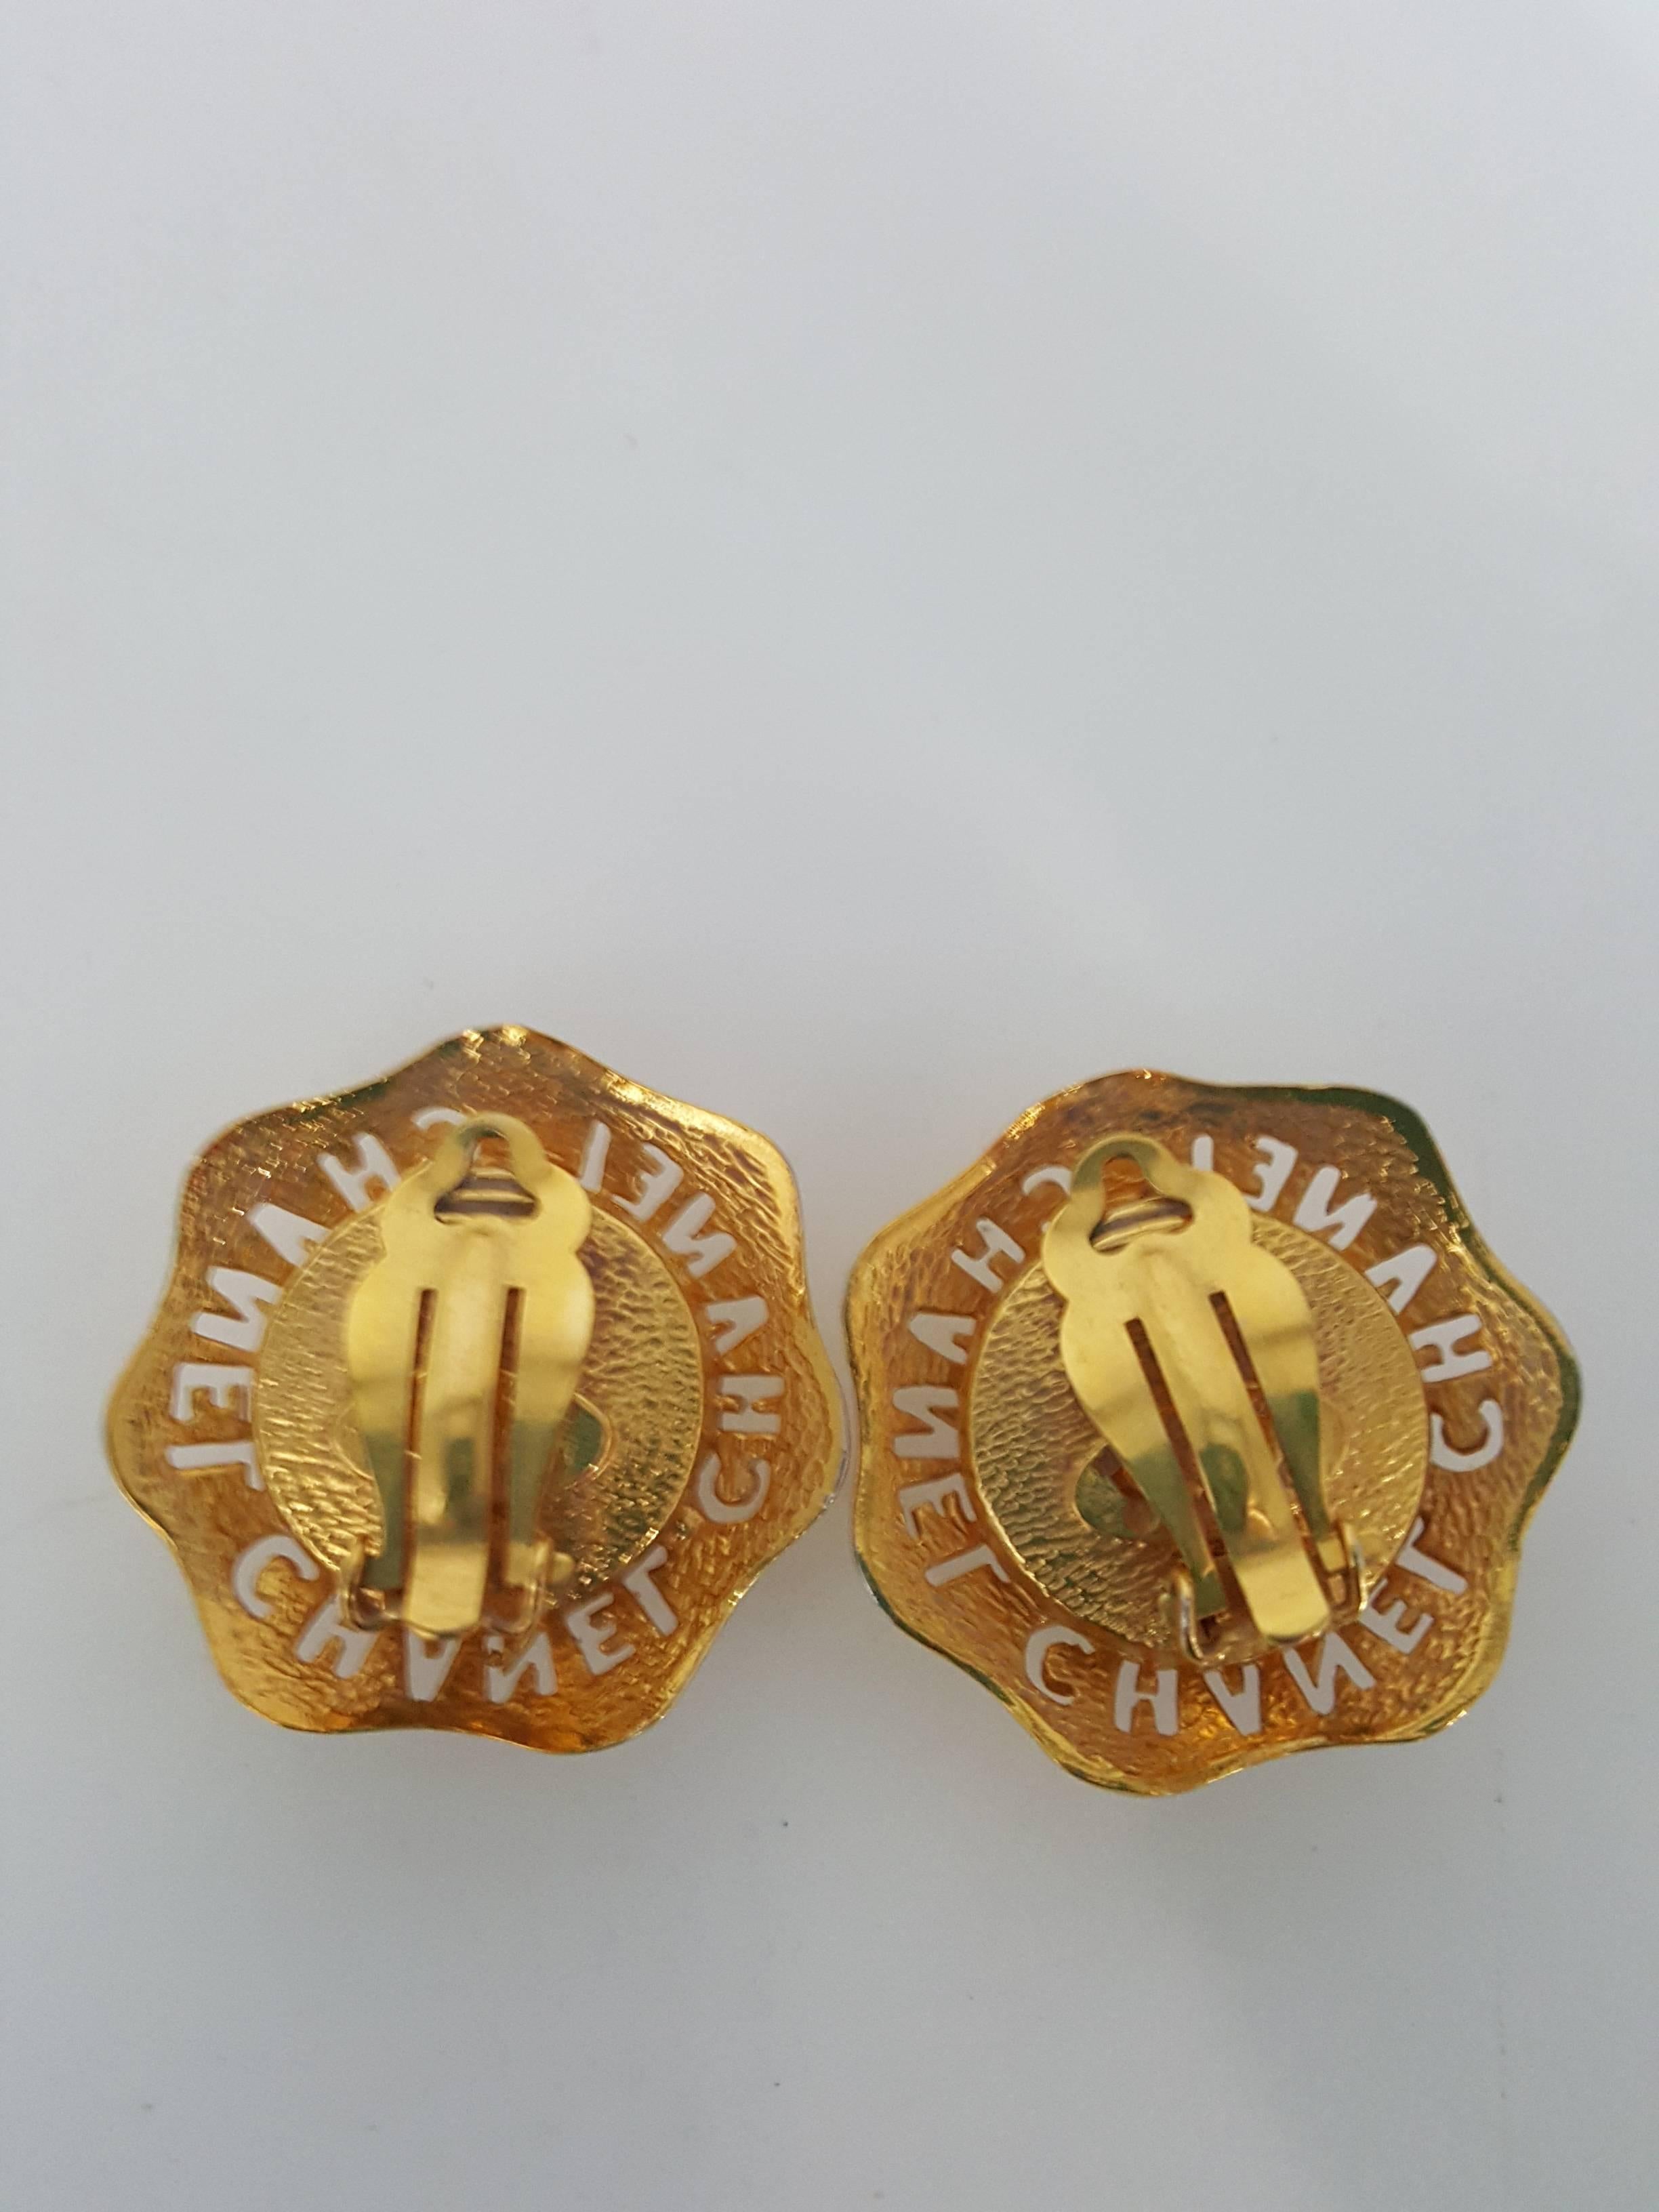 Offered for sale are these rare and Vintage Chanel clip on earrings with Chanel cut out around a large pearl.  These are in bright gold and in excellent condition for the 80's.  They measure 1 1/2